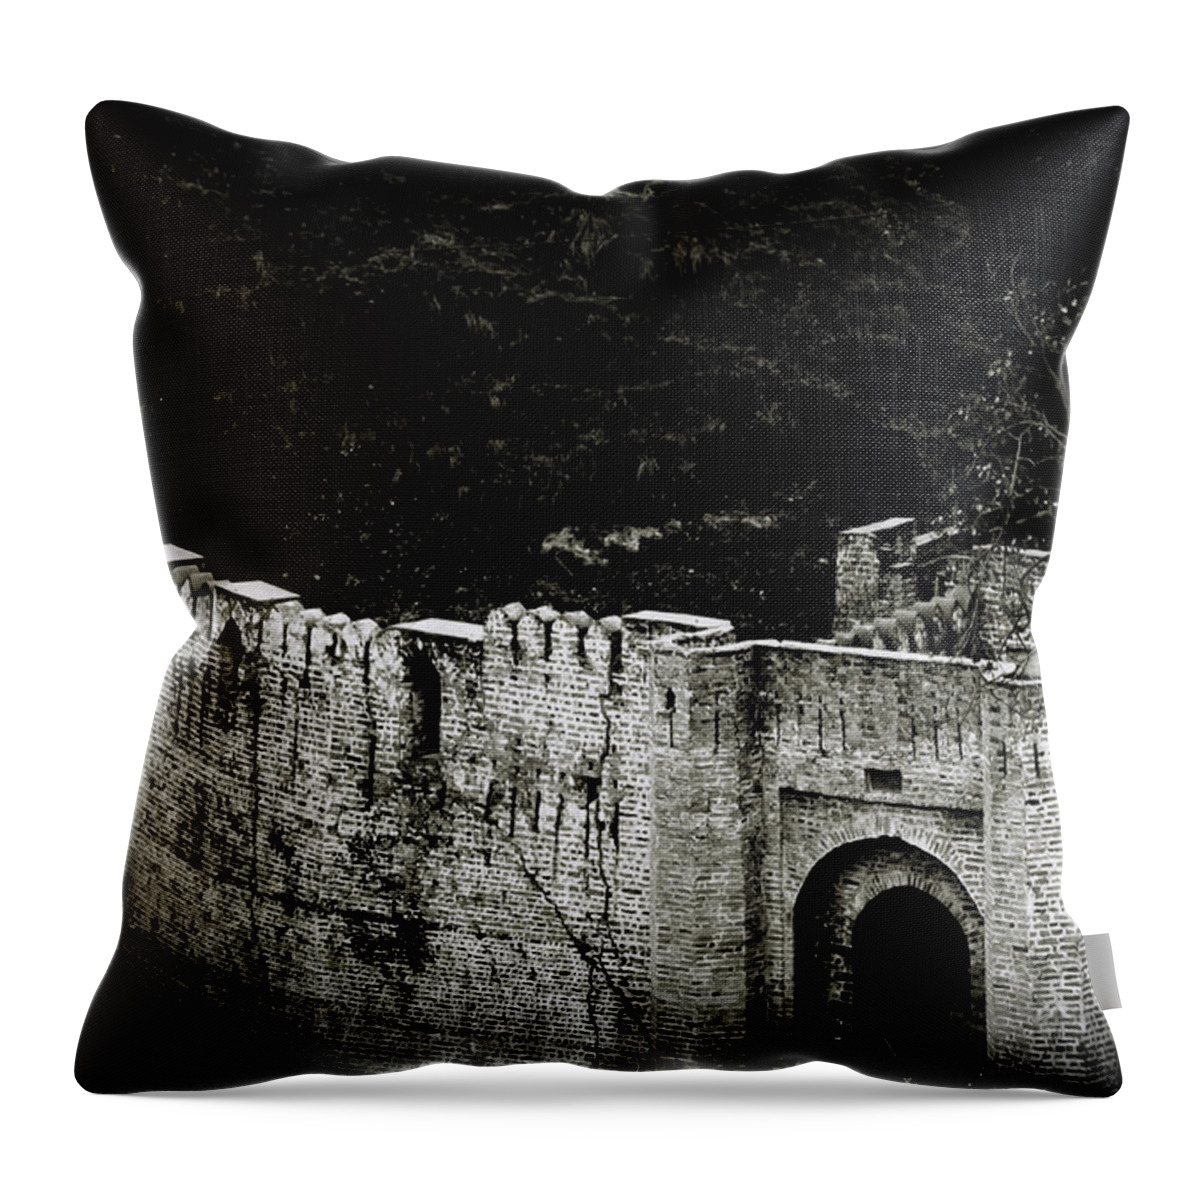 India Throw Pillow featuring the photograph Kangra Fort Gate by Rajiv Chopra